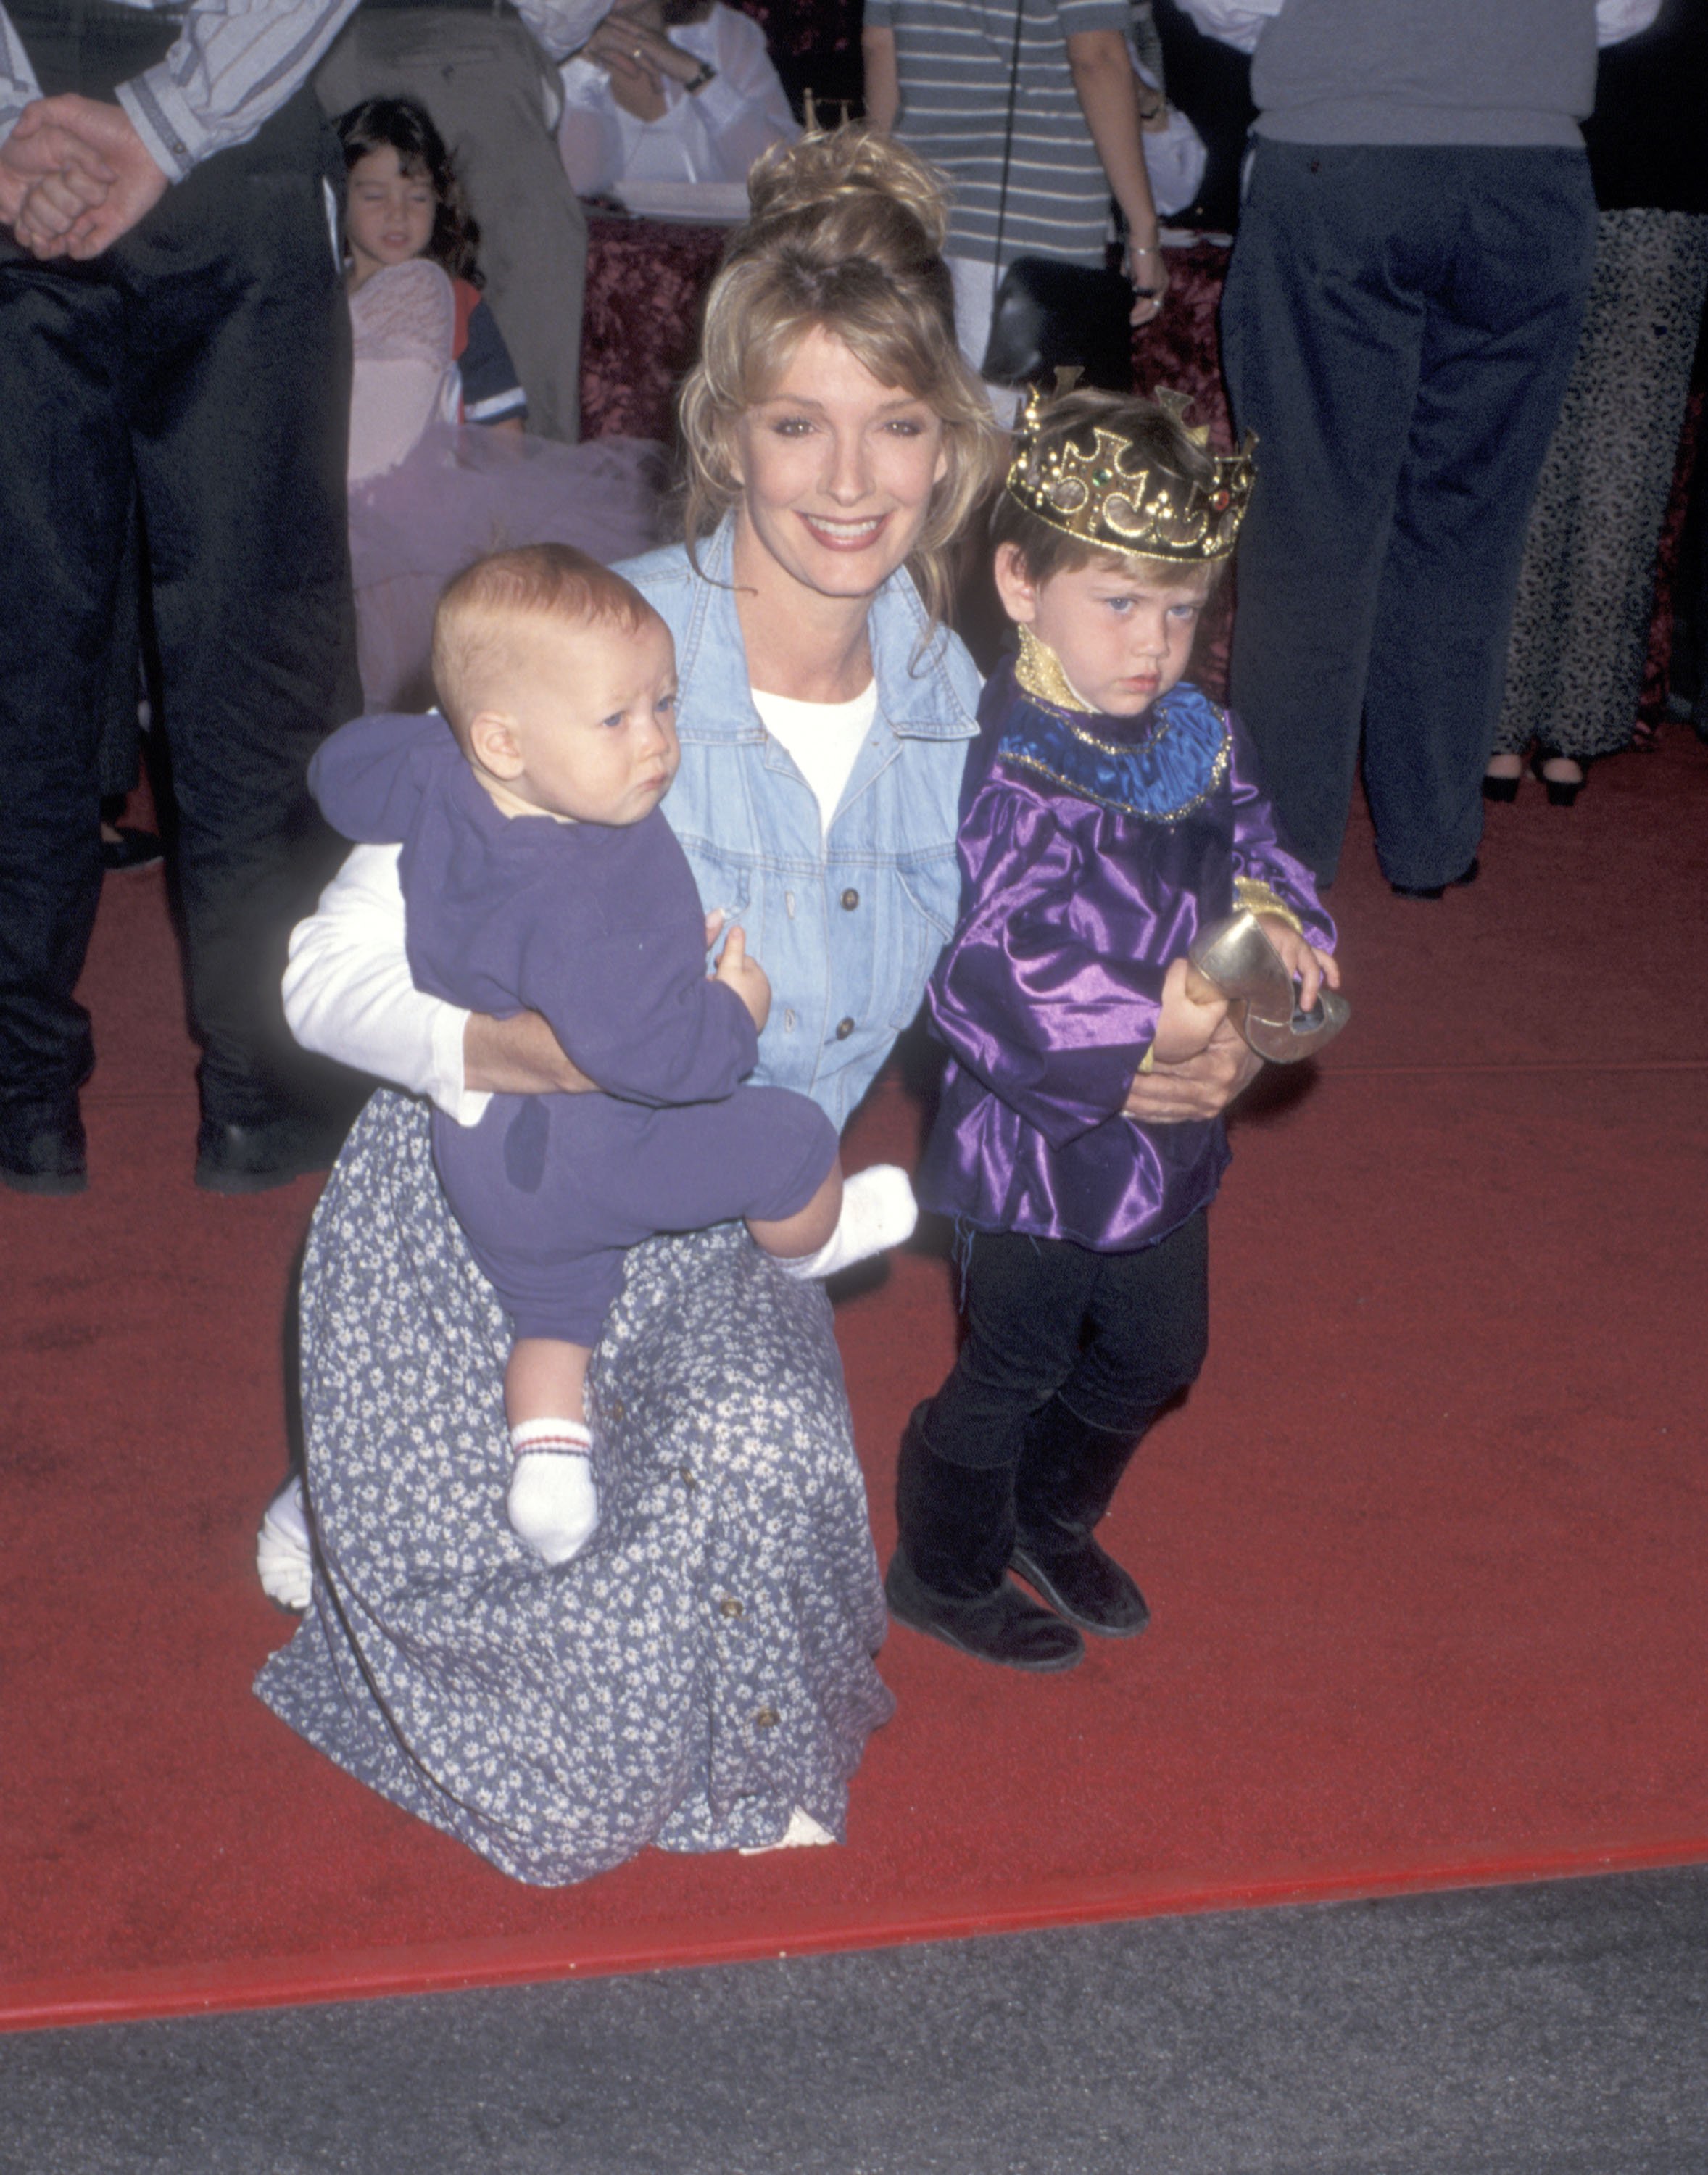 Deidre Hall and her sons Tully Sohmer and David Sohmer attend the "Cinderella" Video Cassette and Album Release Party at Walt Disney Studios on October 2, 1995 in Burbank, California ┃Source: Getty Images